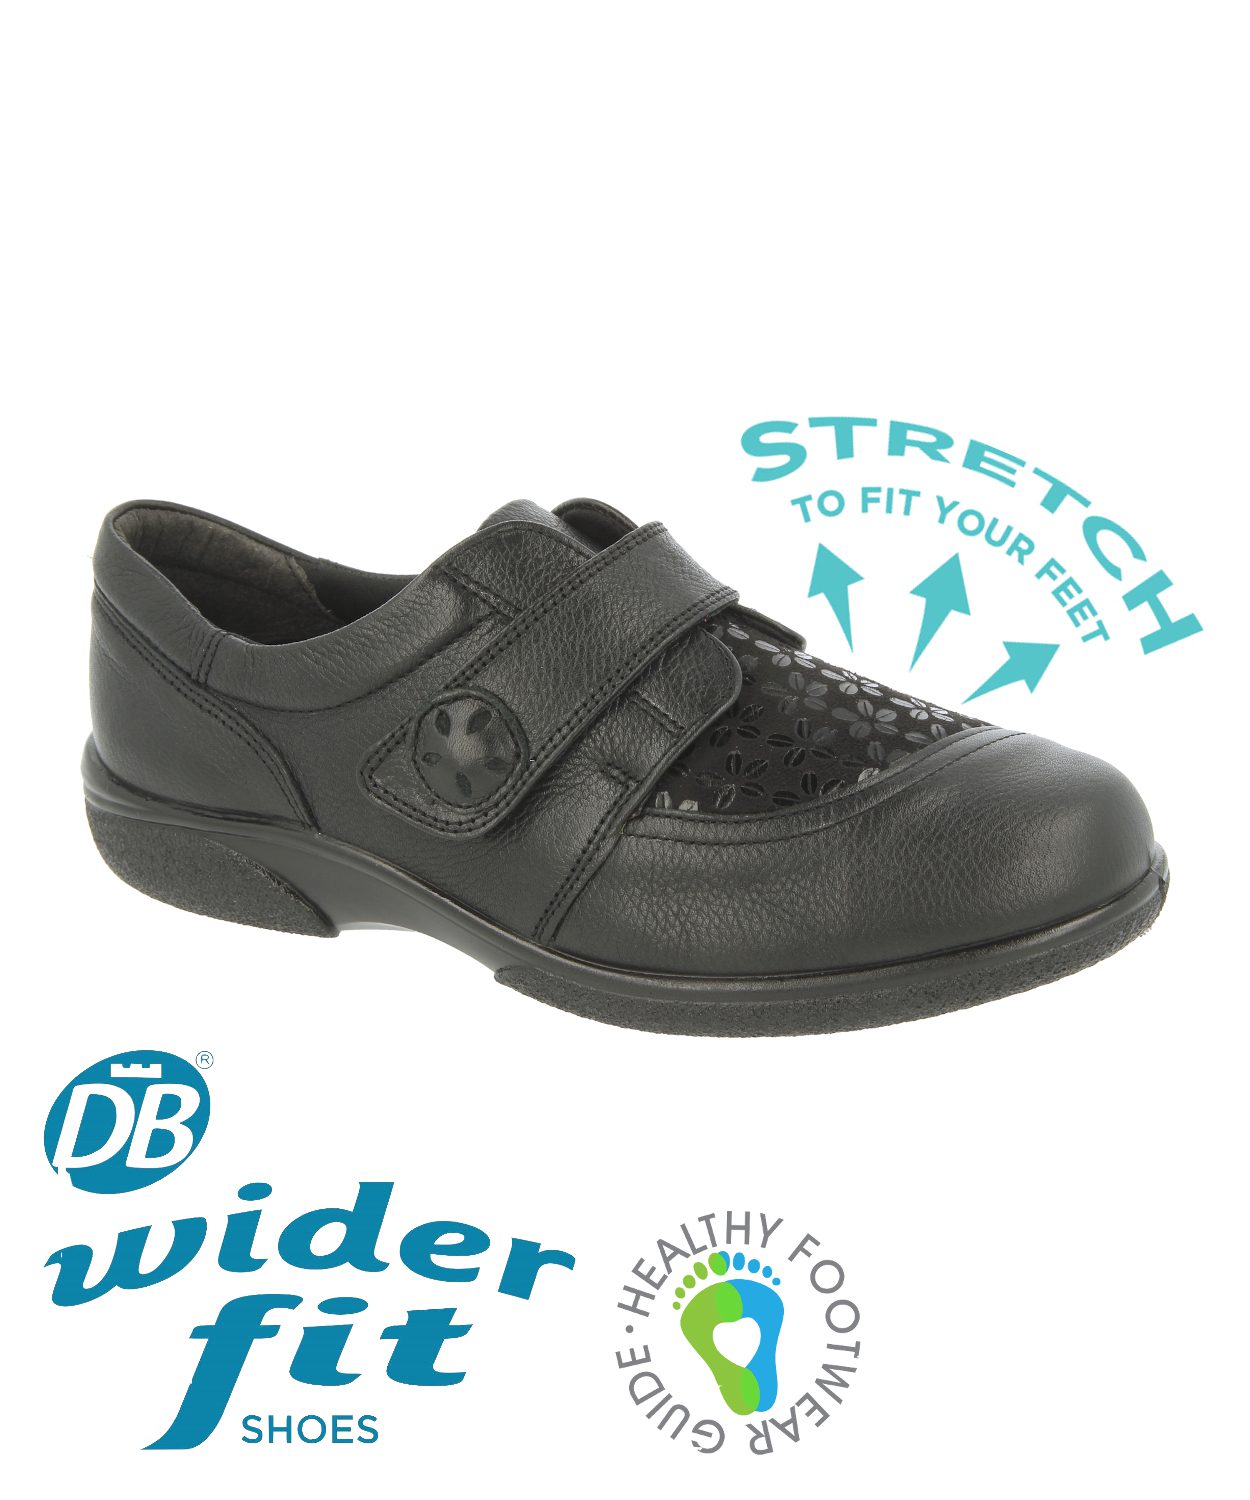 db wider fit shoes